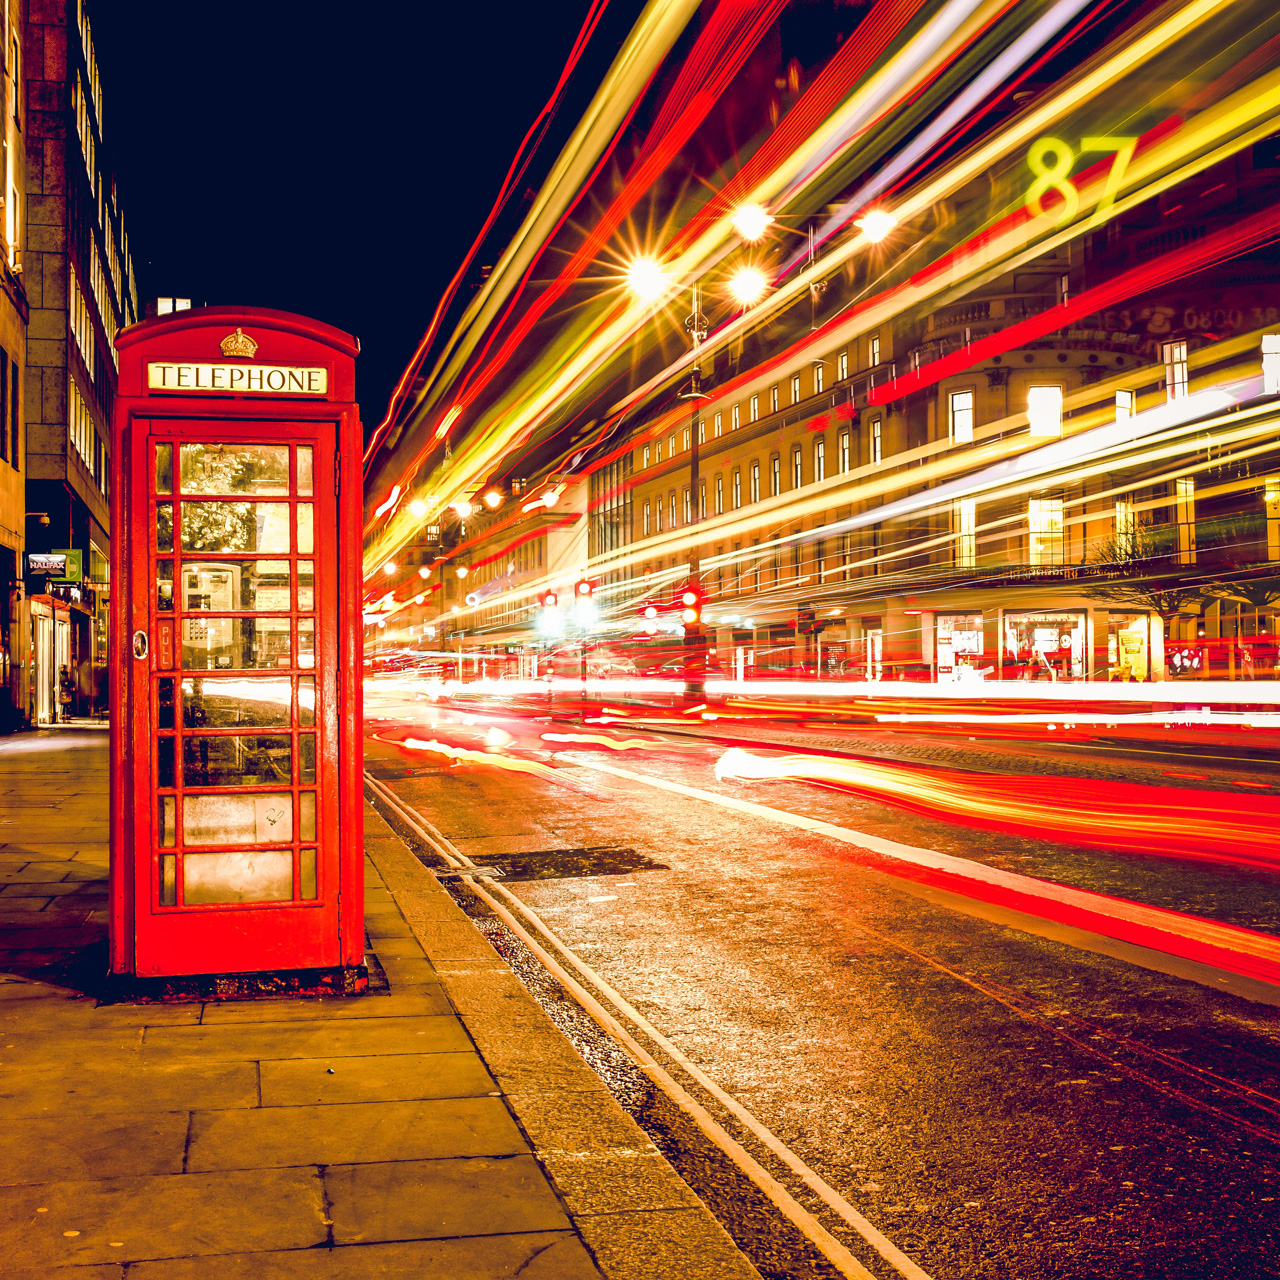 British Telephone Booth, the impact of Brexit on Investment